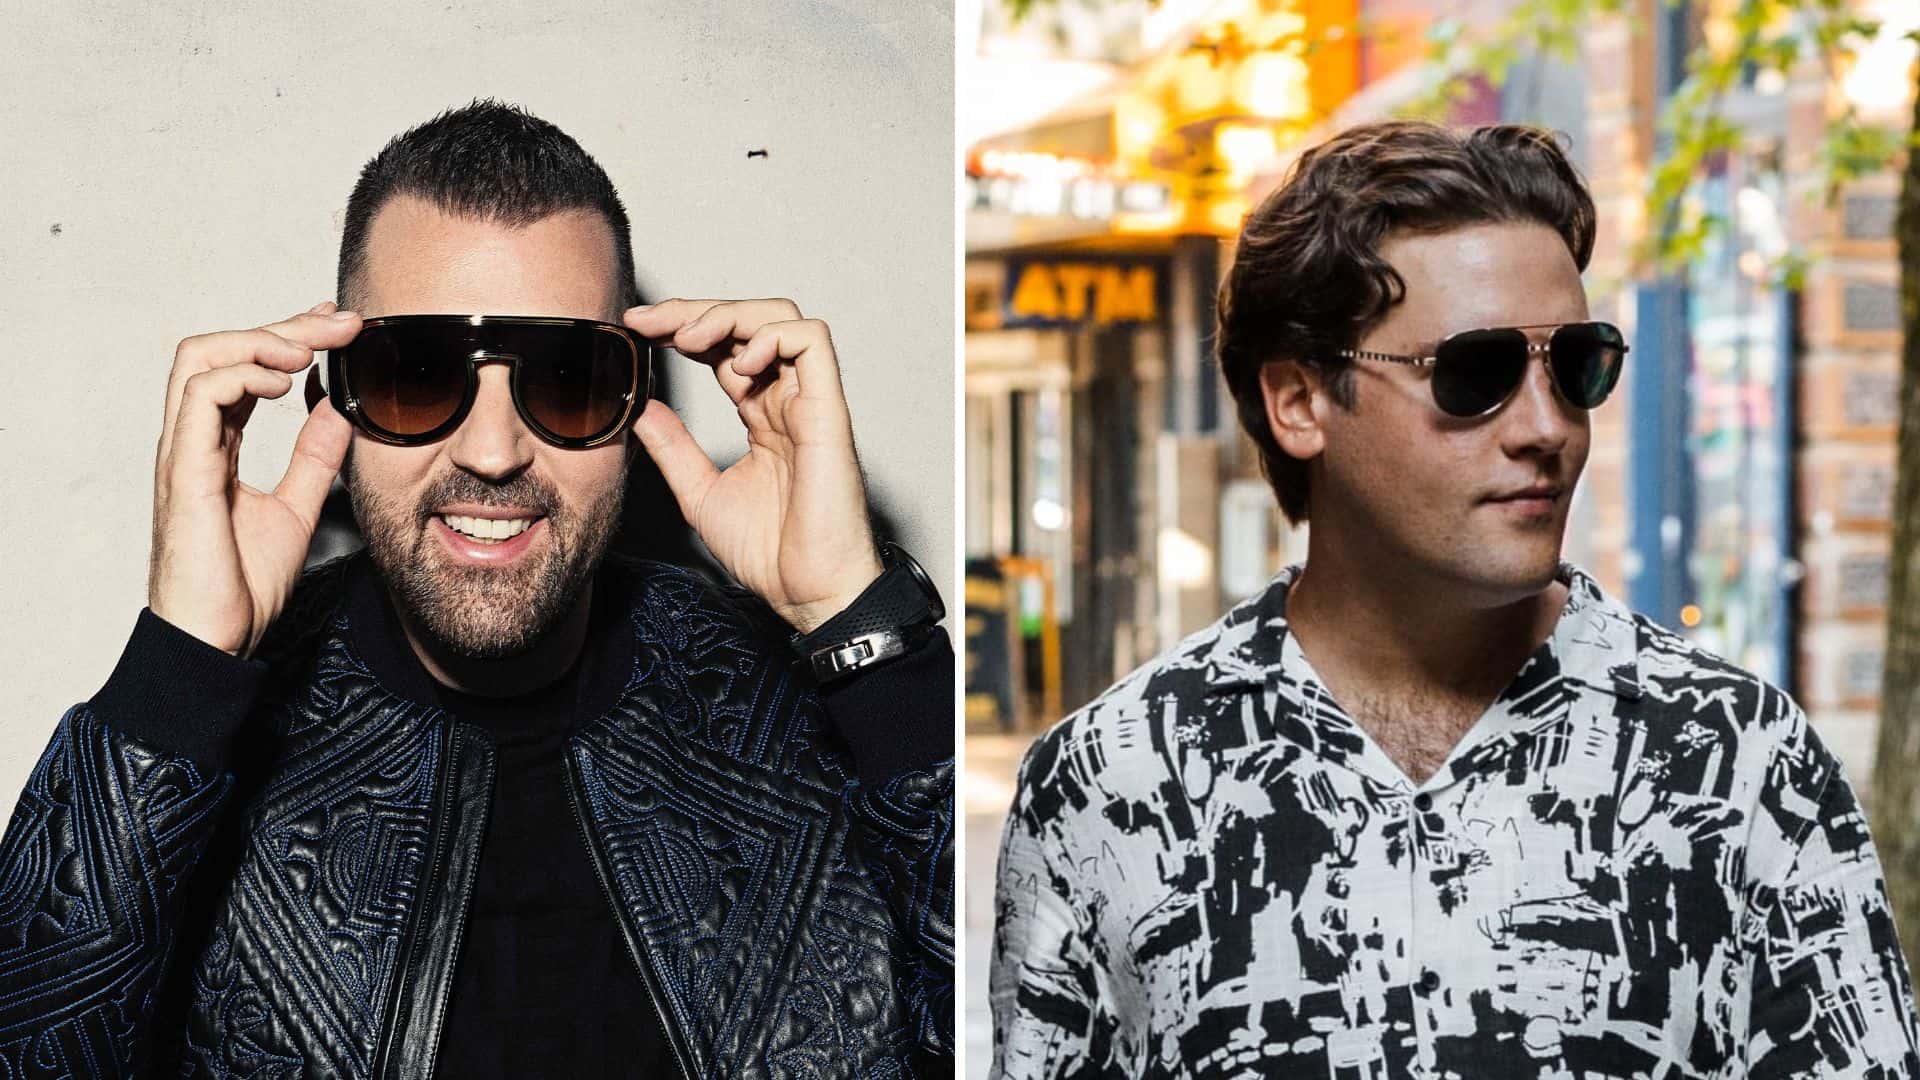 SHWAY & Brennan Heart joins forces for euphoric hardstyle remake of ‘Solo’: Listen